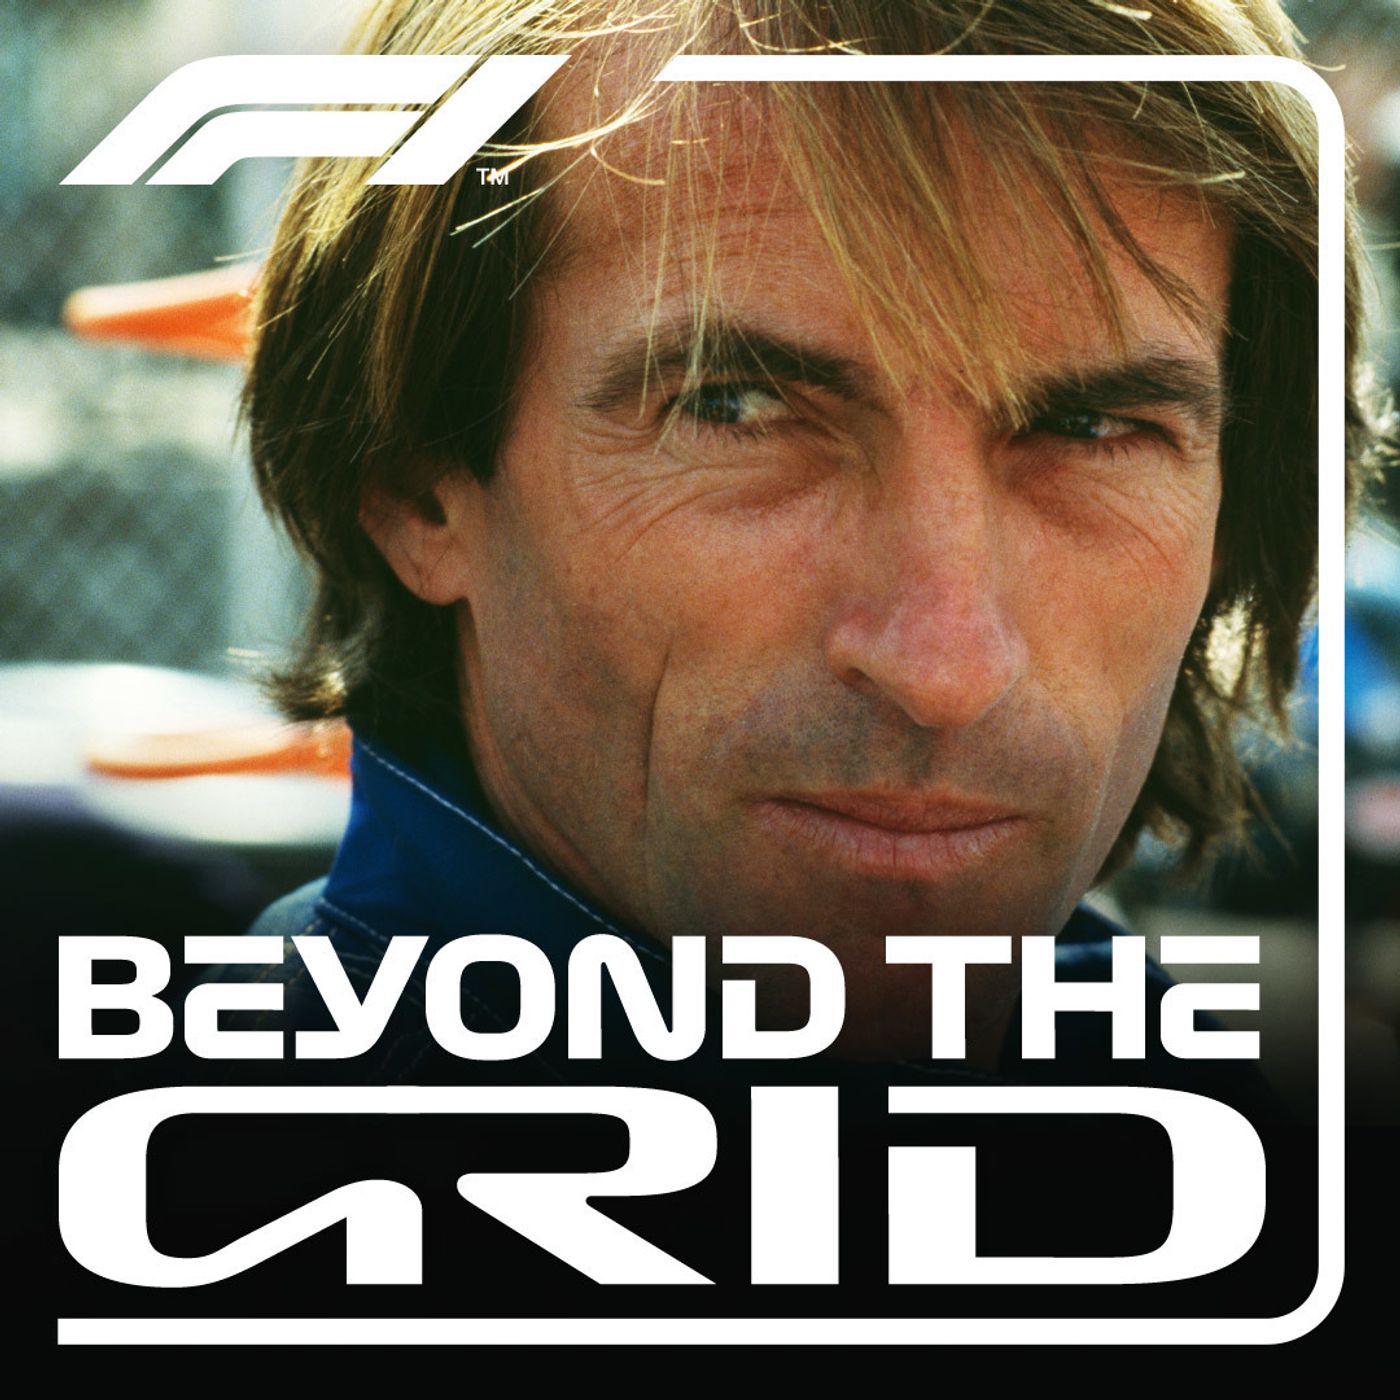 Jacques Laffite on 12 years in F1, winning with Ligier and missed championship chances